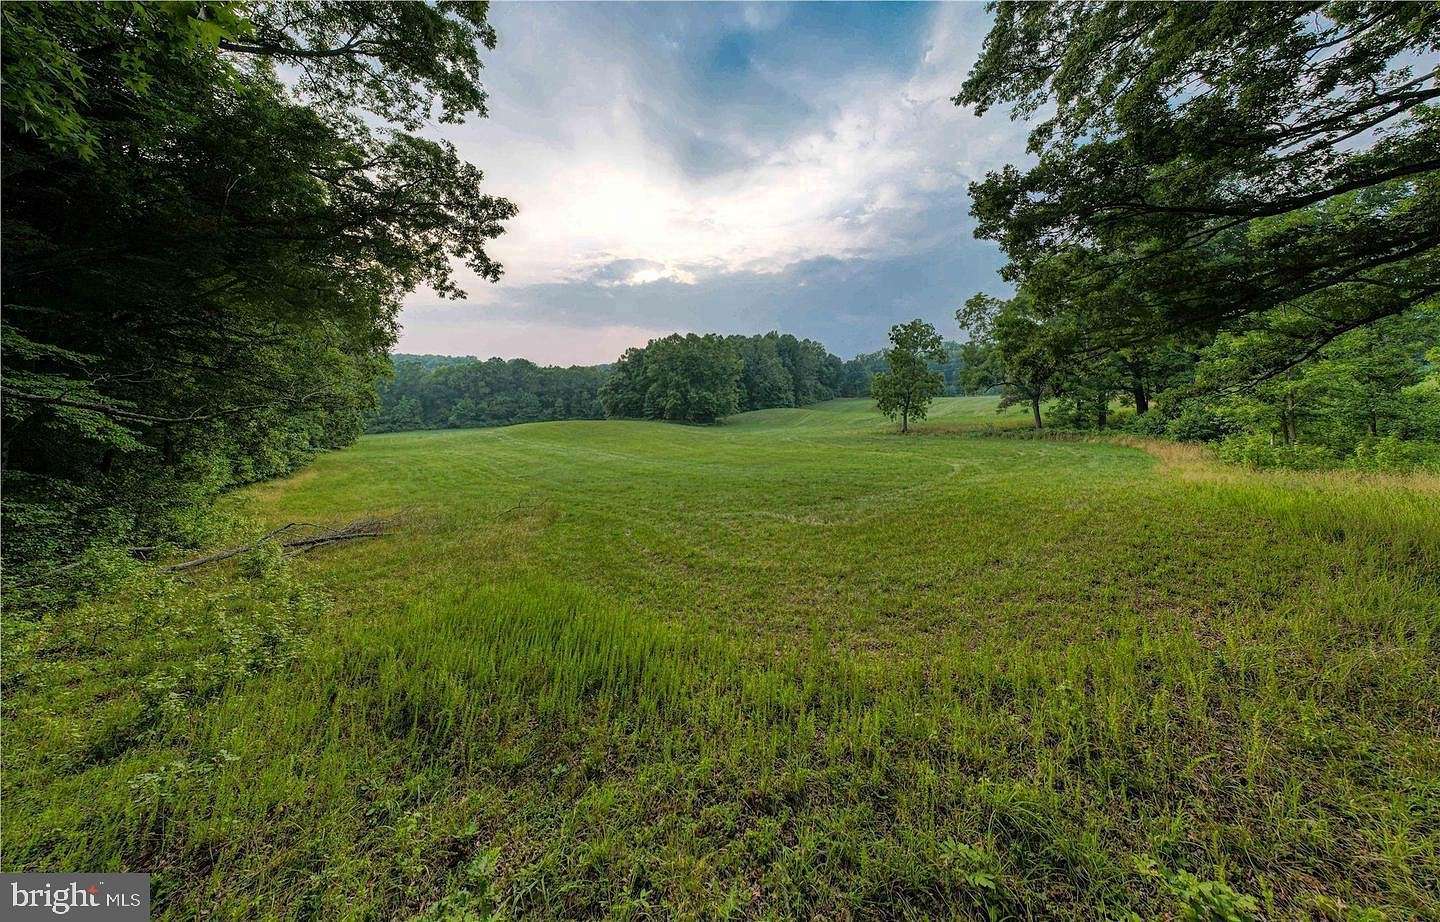 75.93 Acres of Recreational Land for Sale in La Plata, Maryland